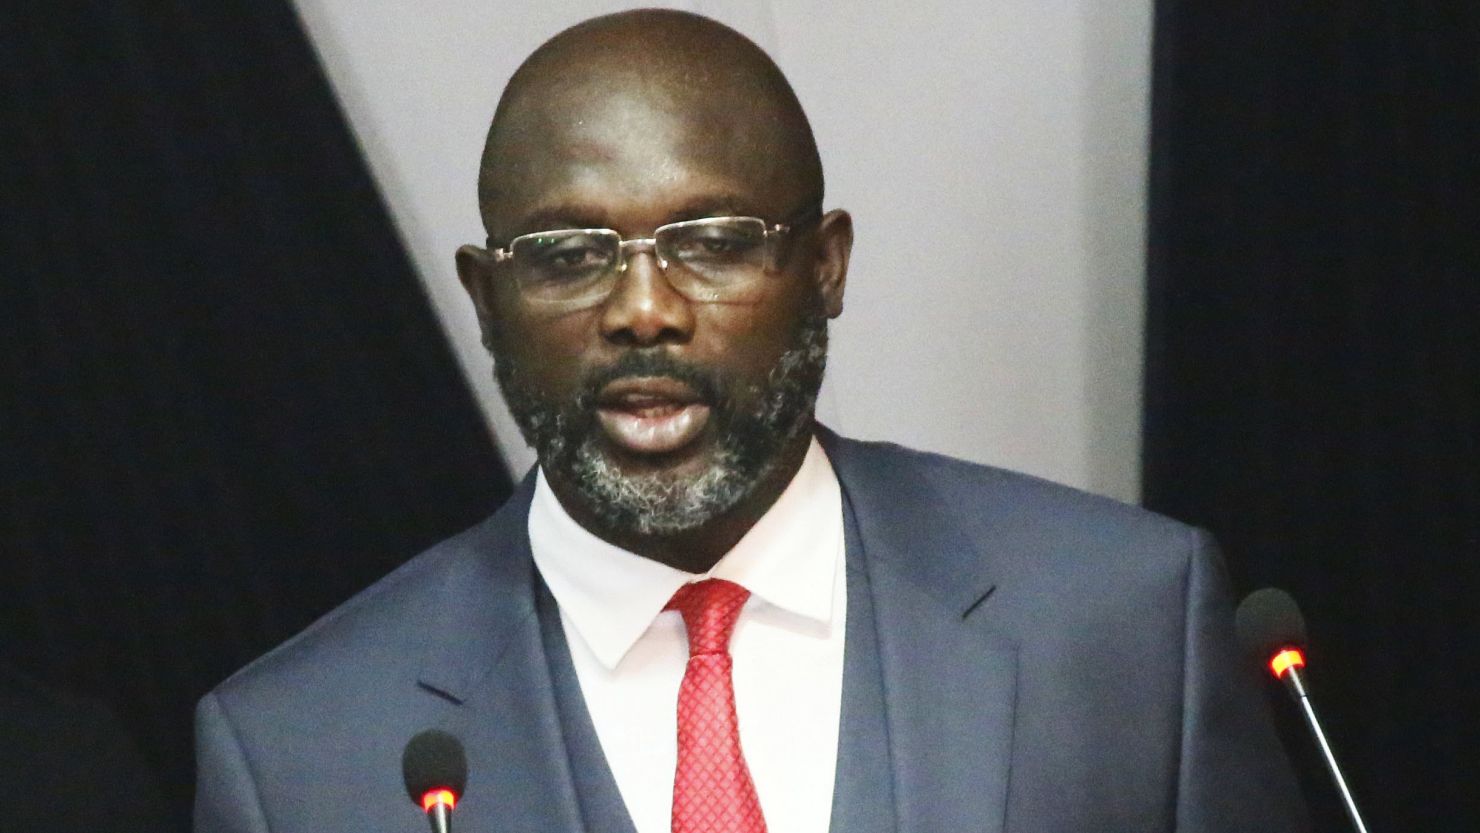 Liberian President George Weah gives his State of the Republic address in Monrovia on Monday.